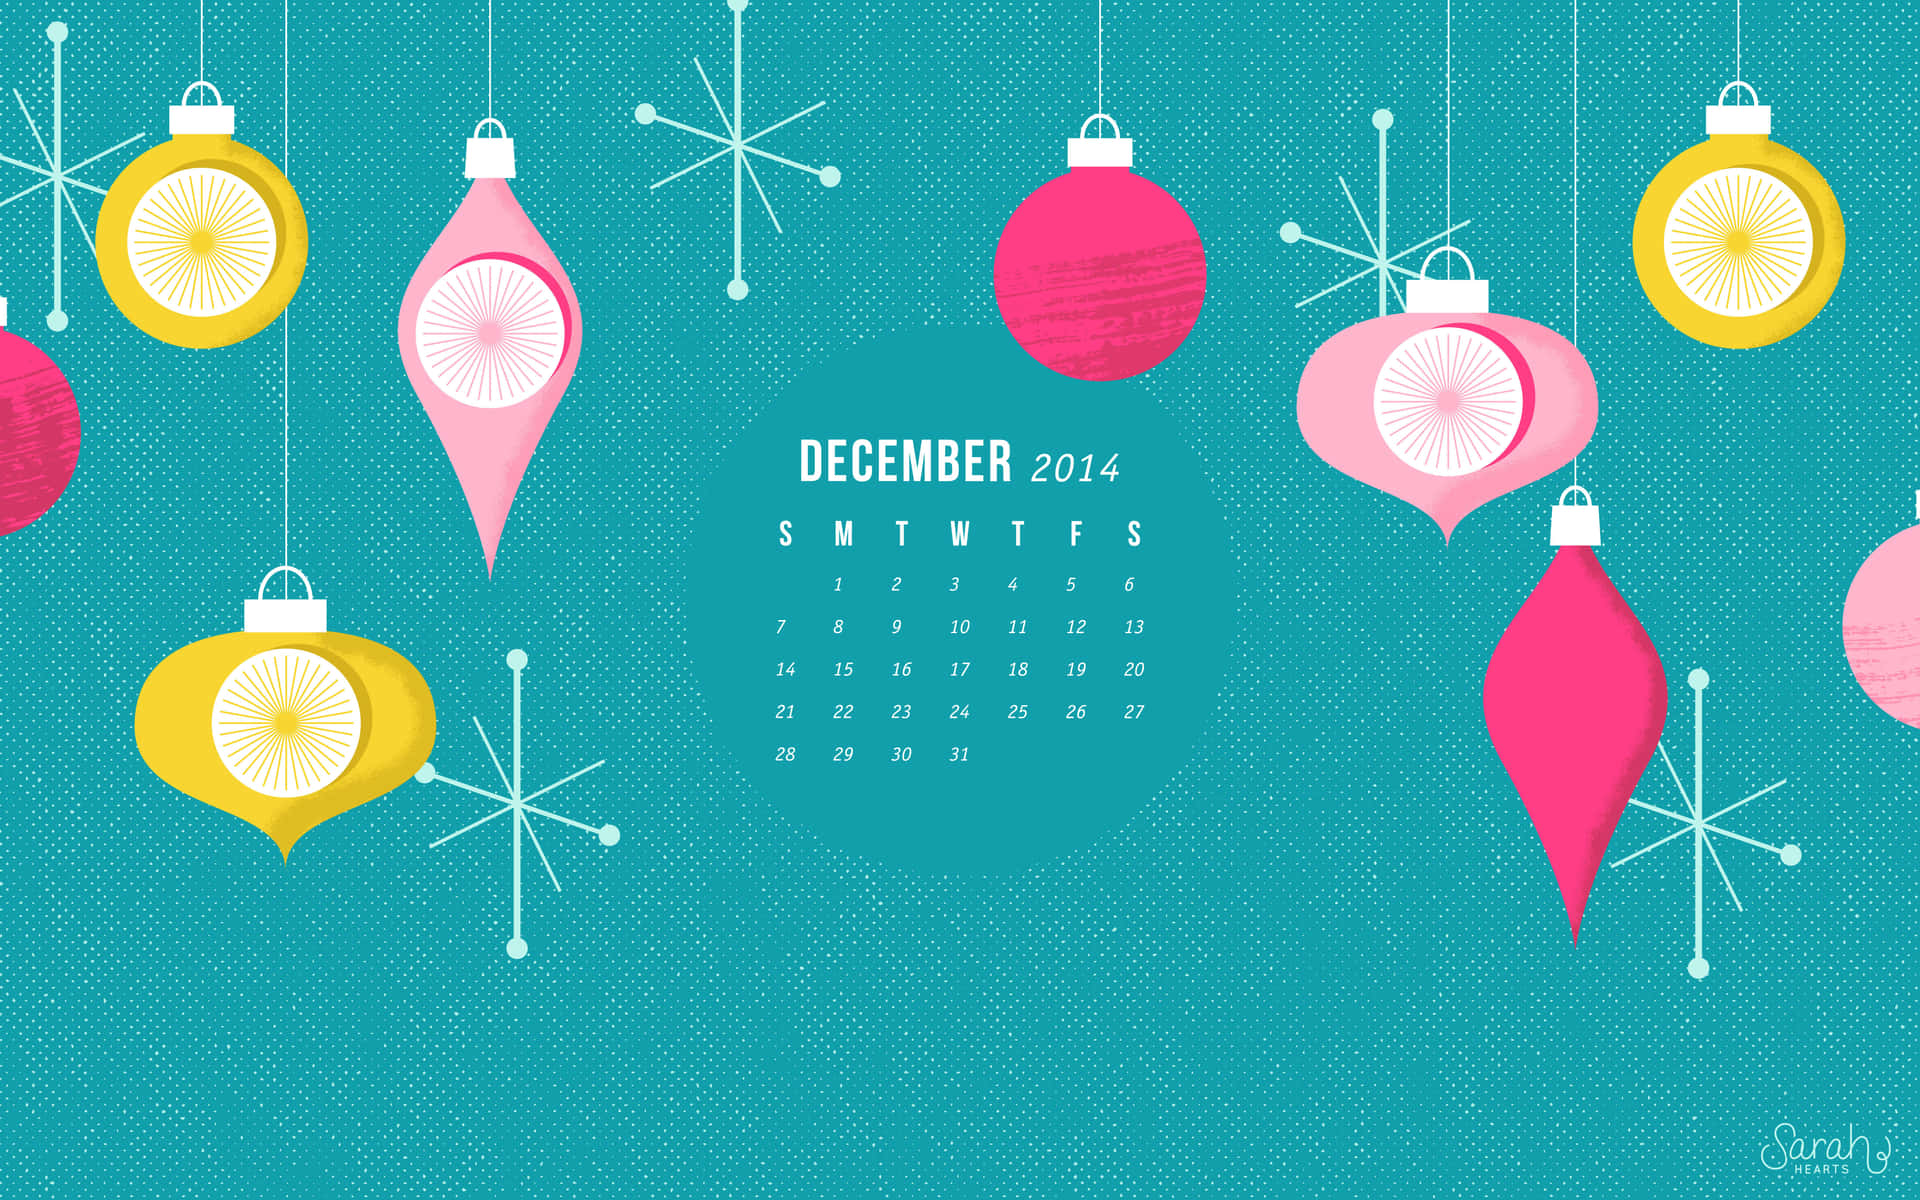 'Start the holiday season off with a cute December "vibe"' Wallpaper